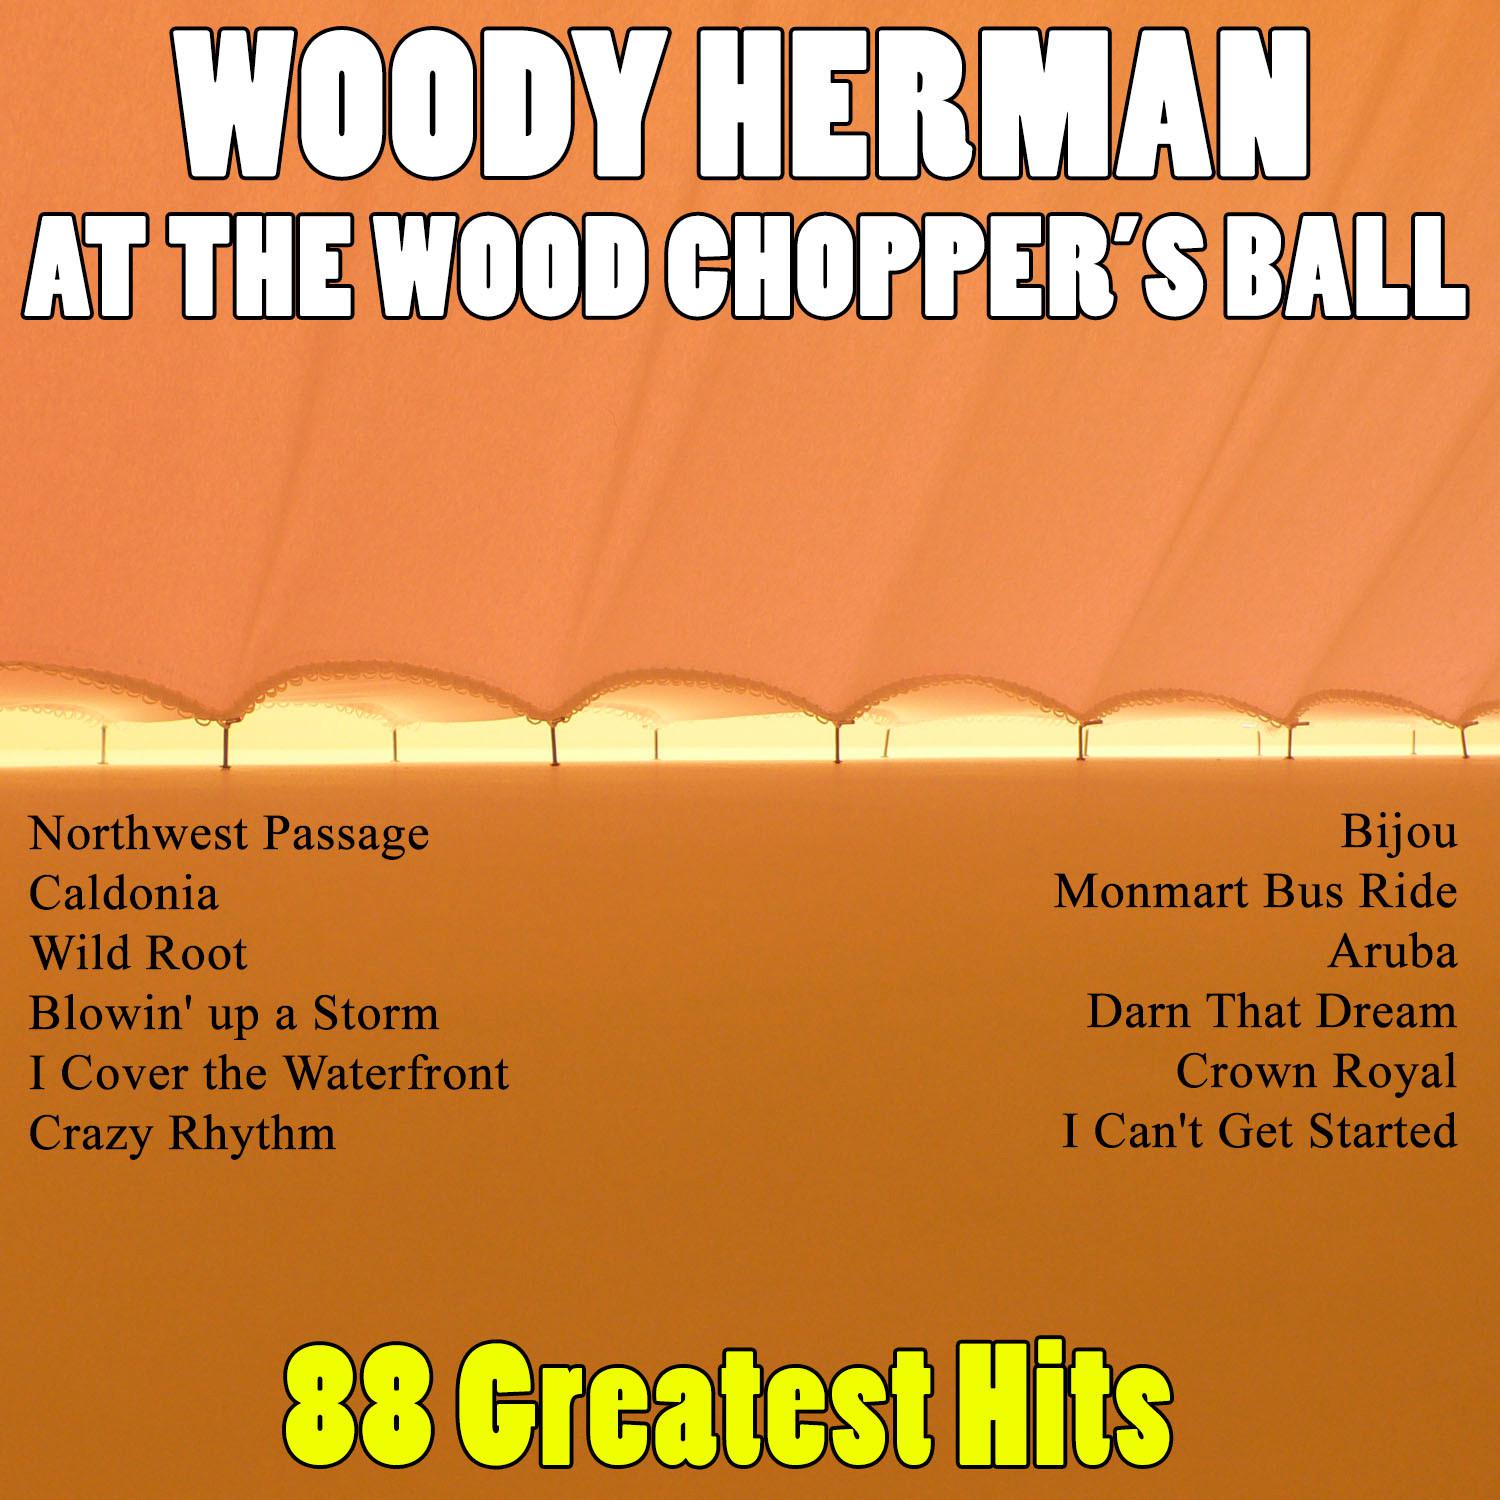 At the Woodchopper's Ball - 88 Greatest Hits